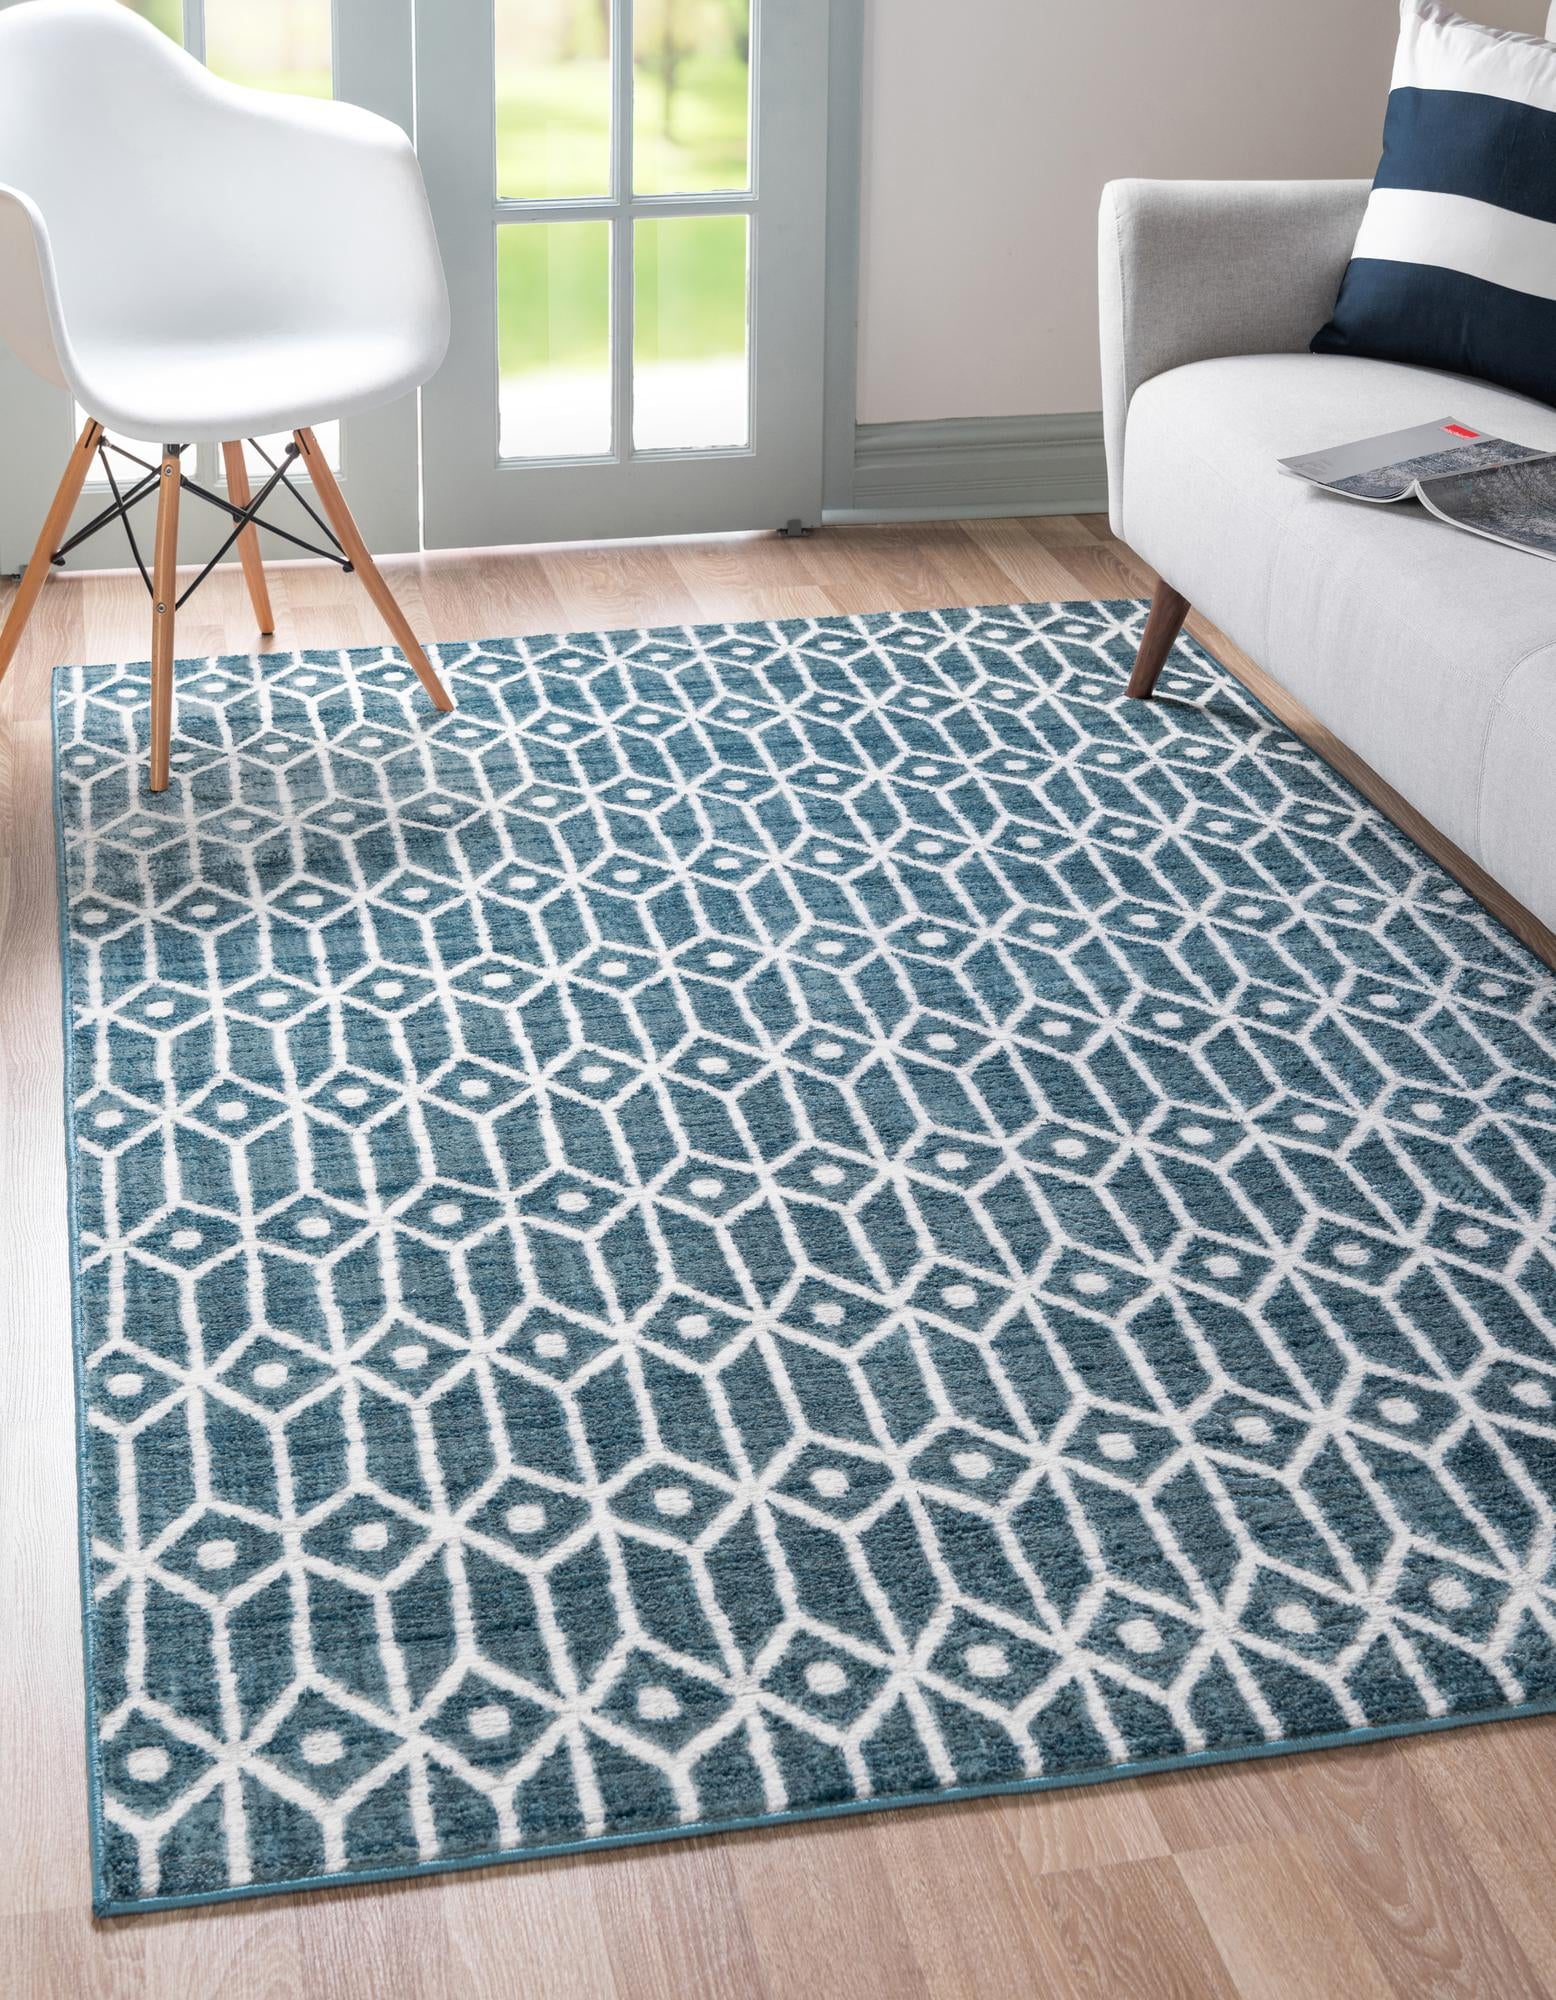 Rugs.com Lattice Shag Collection Rug Open Floorplans 9' x 12' Light Blue Shag Rug Perfect for Living Rooms Large Dining Rooms 